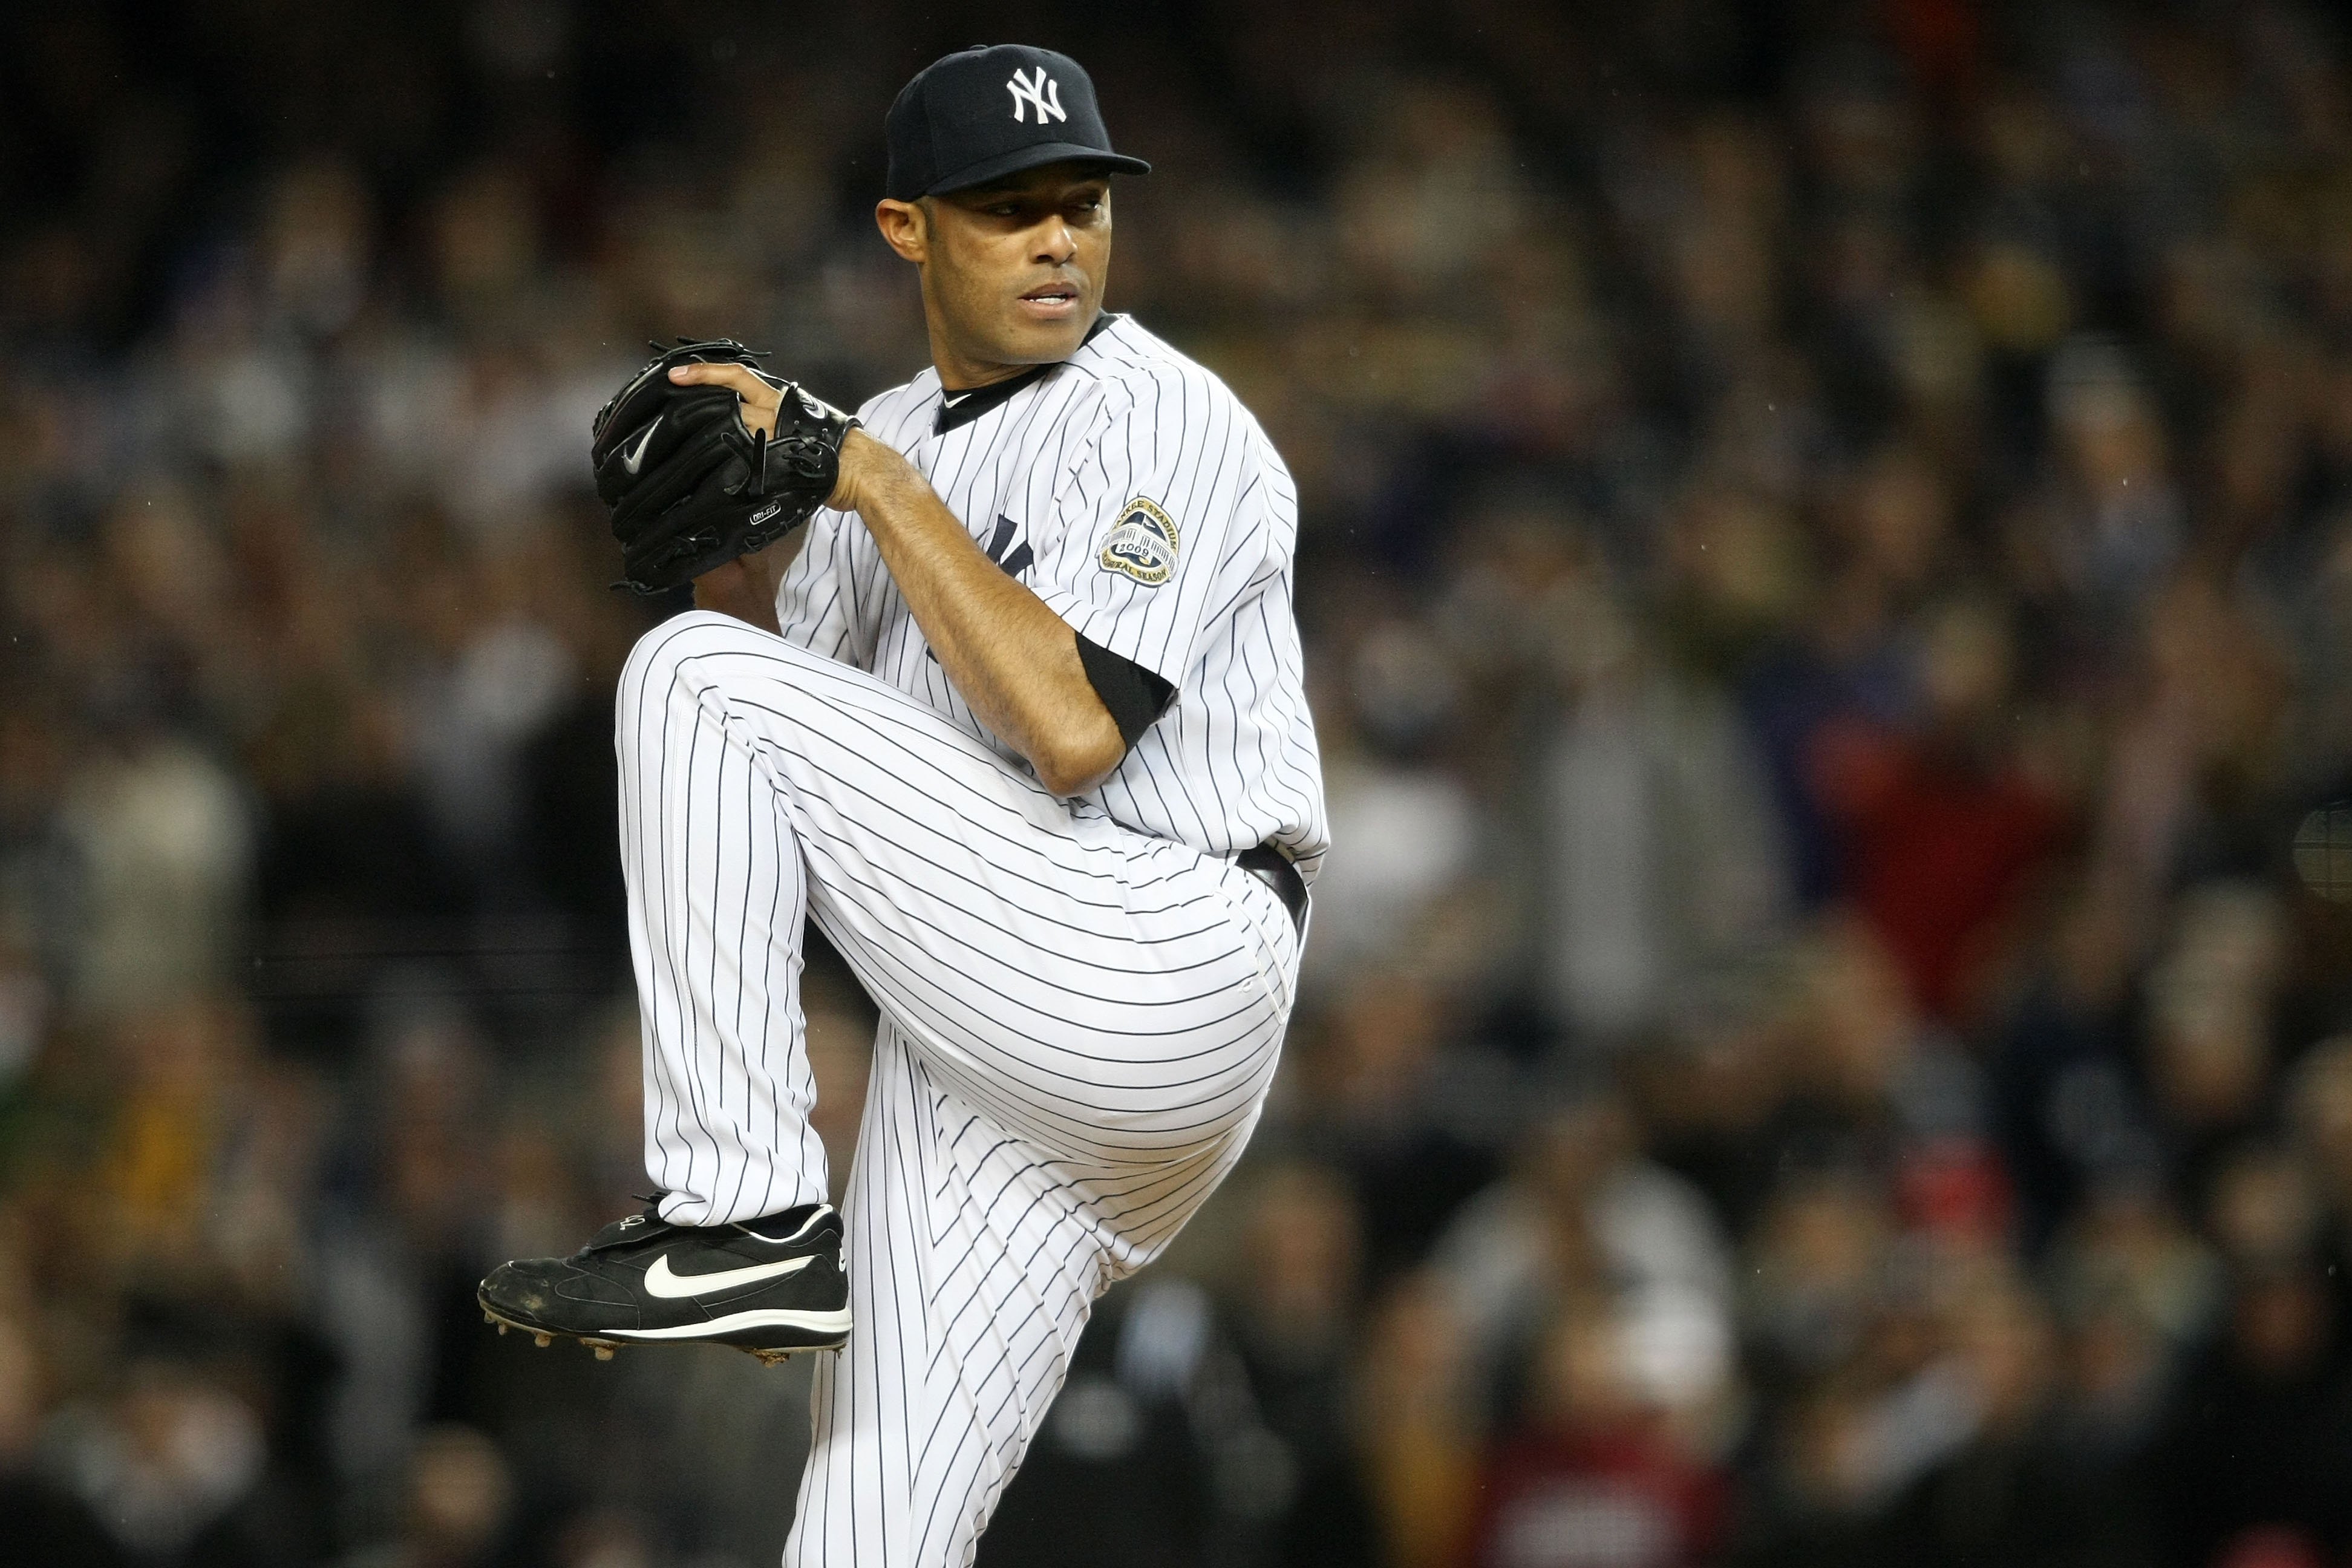 Mariano Rivera pitches during the 2009 MLB World Series against the Philadelphia Phillies at the Yankee Stadium on November 4 | Photo: Getty Images